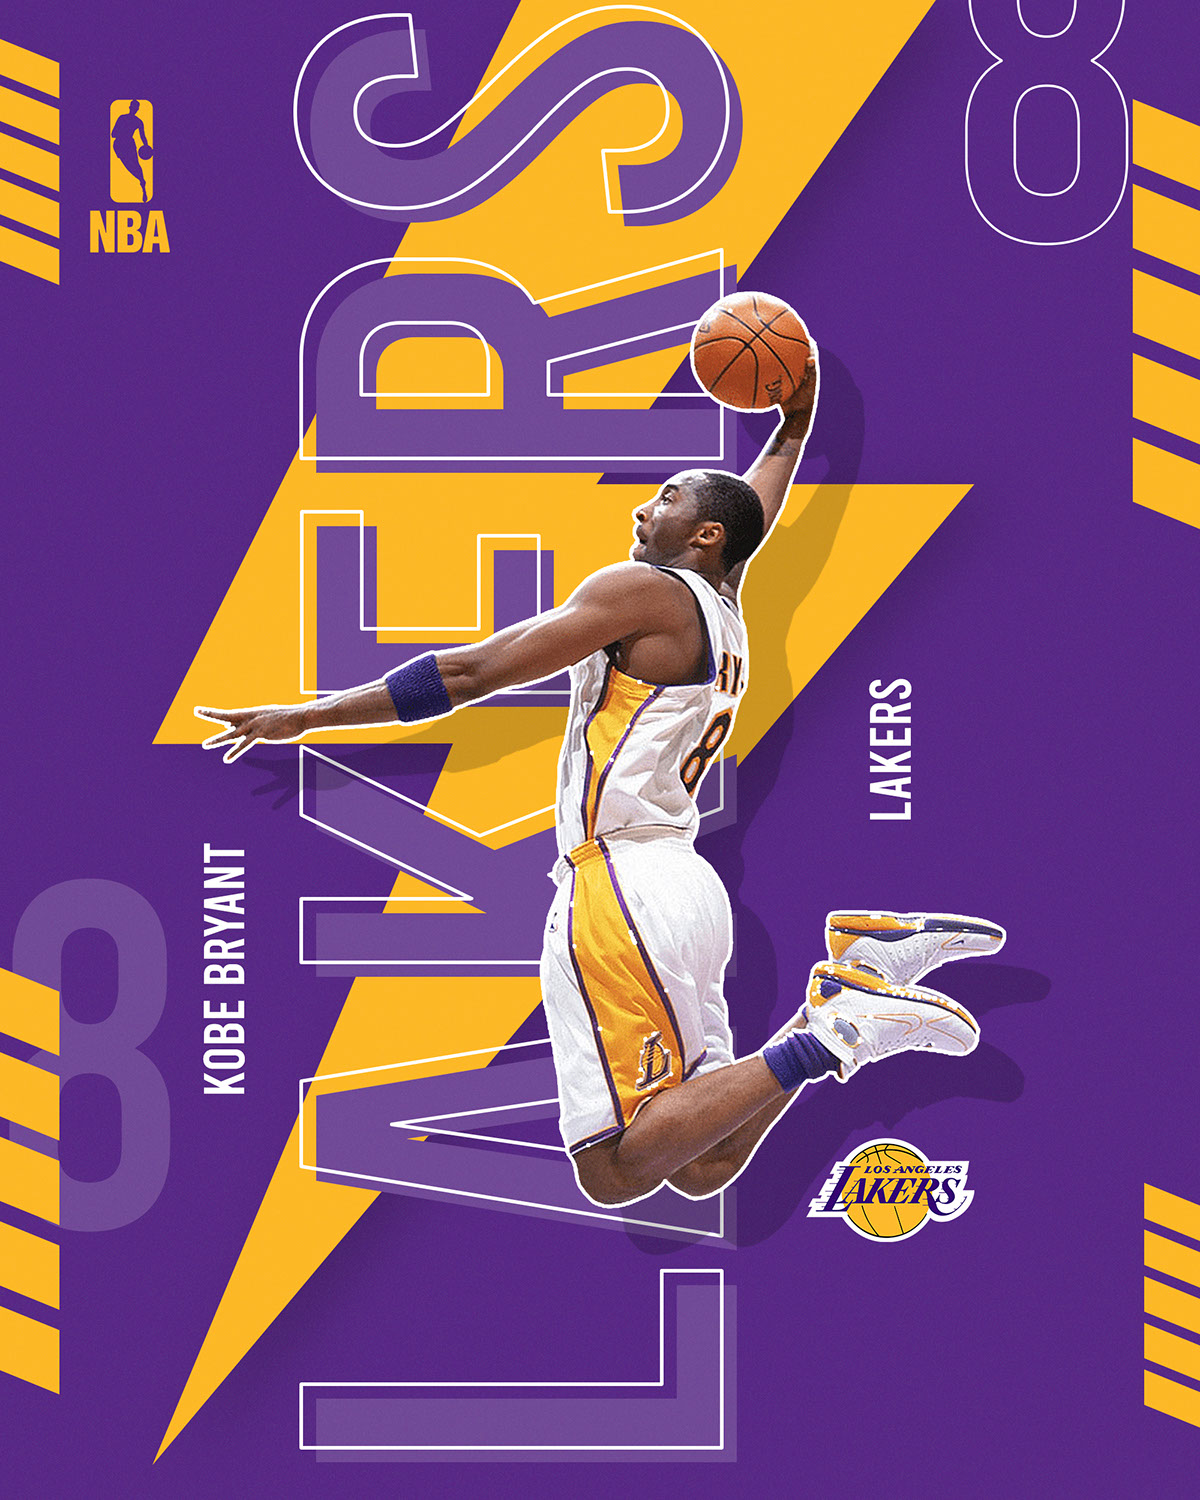 Lakers 8 rendition image